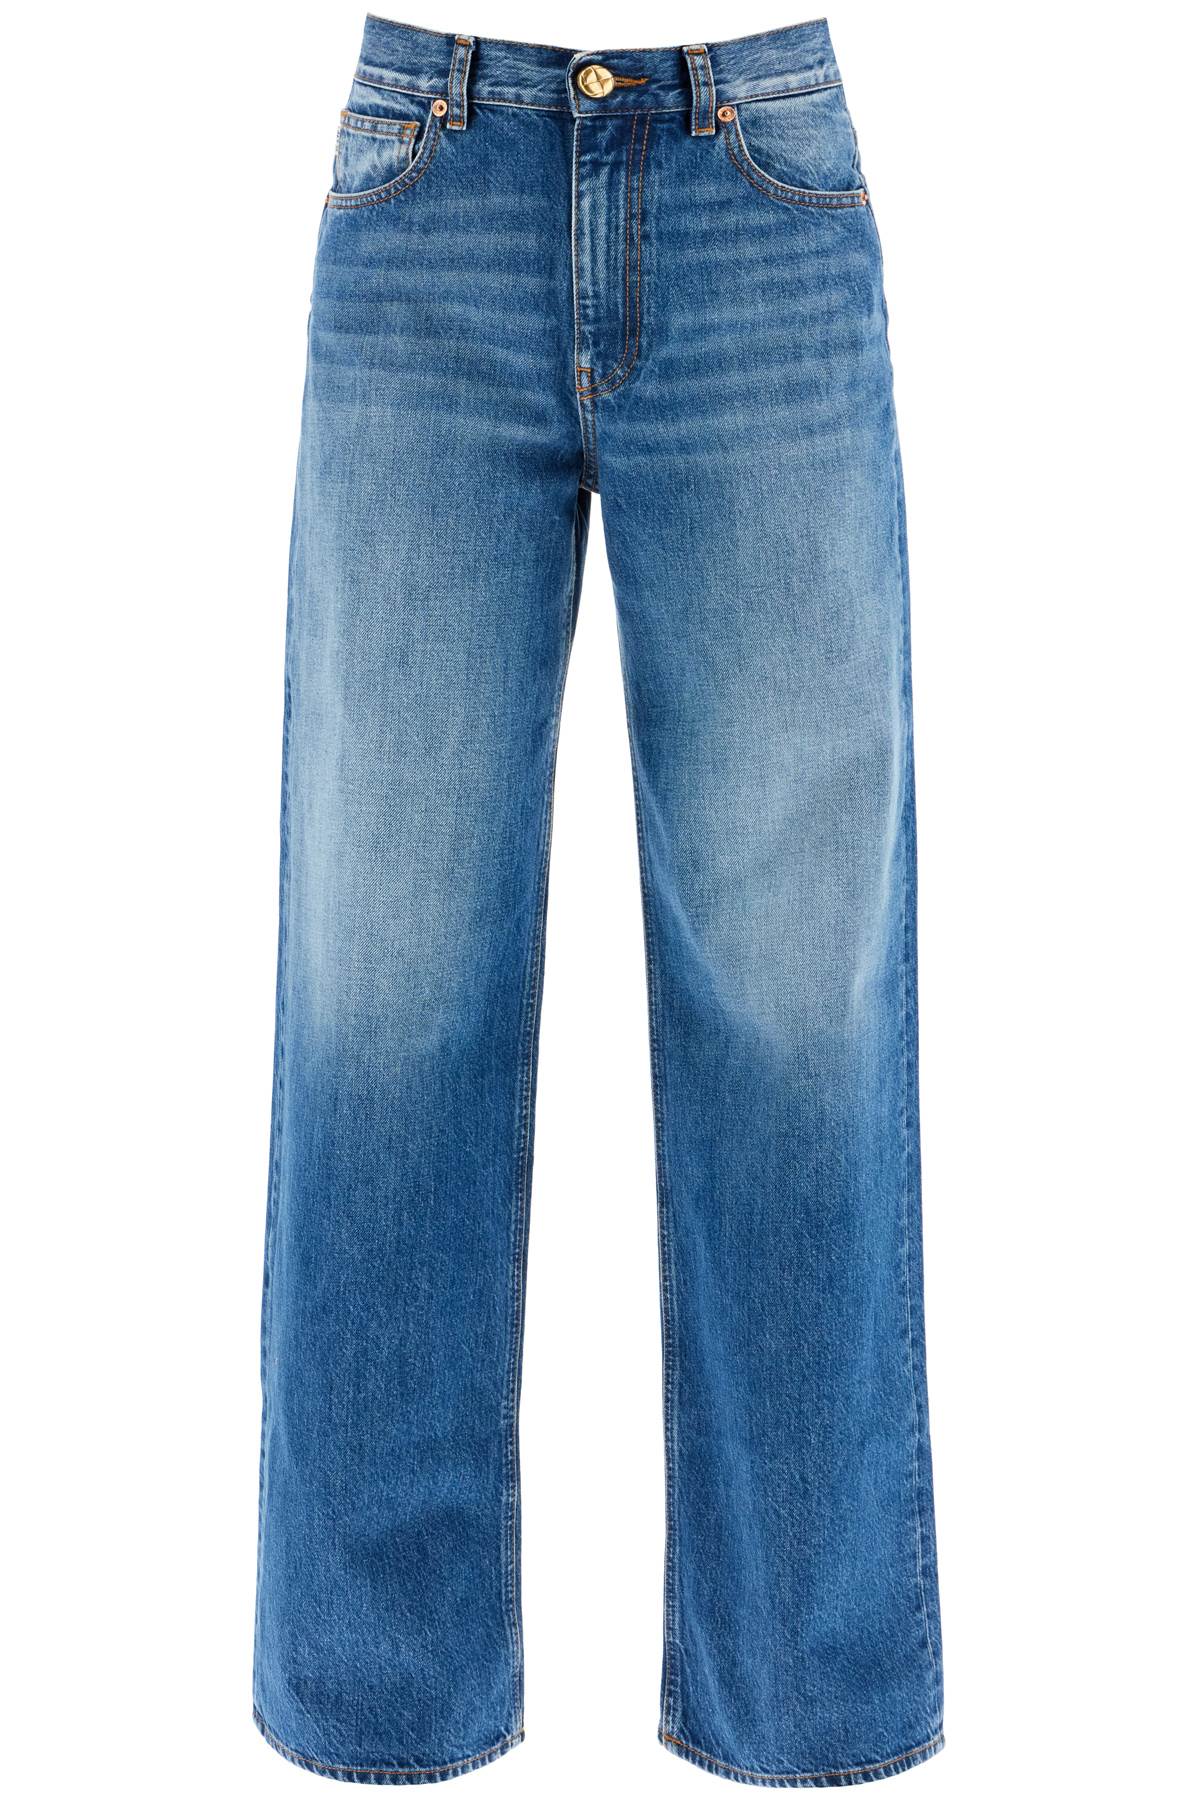 Wide Leg Jeans In Narida Sapphire Java Style